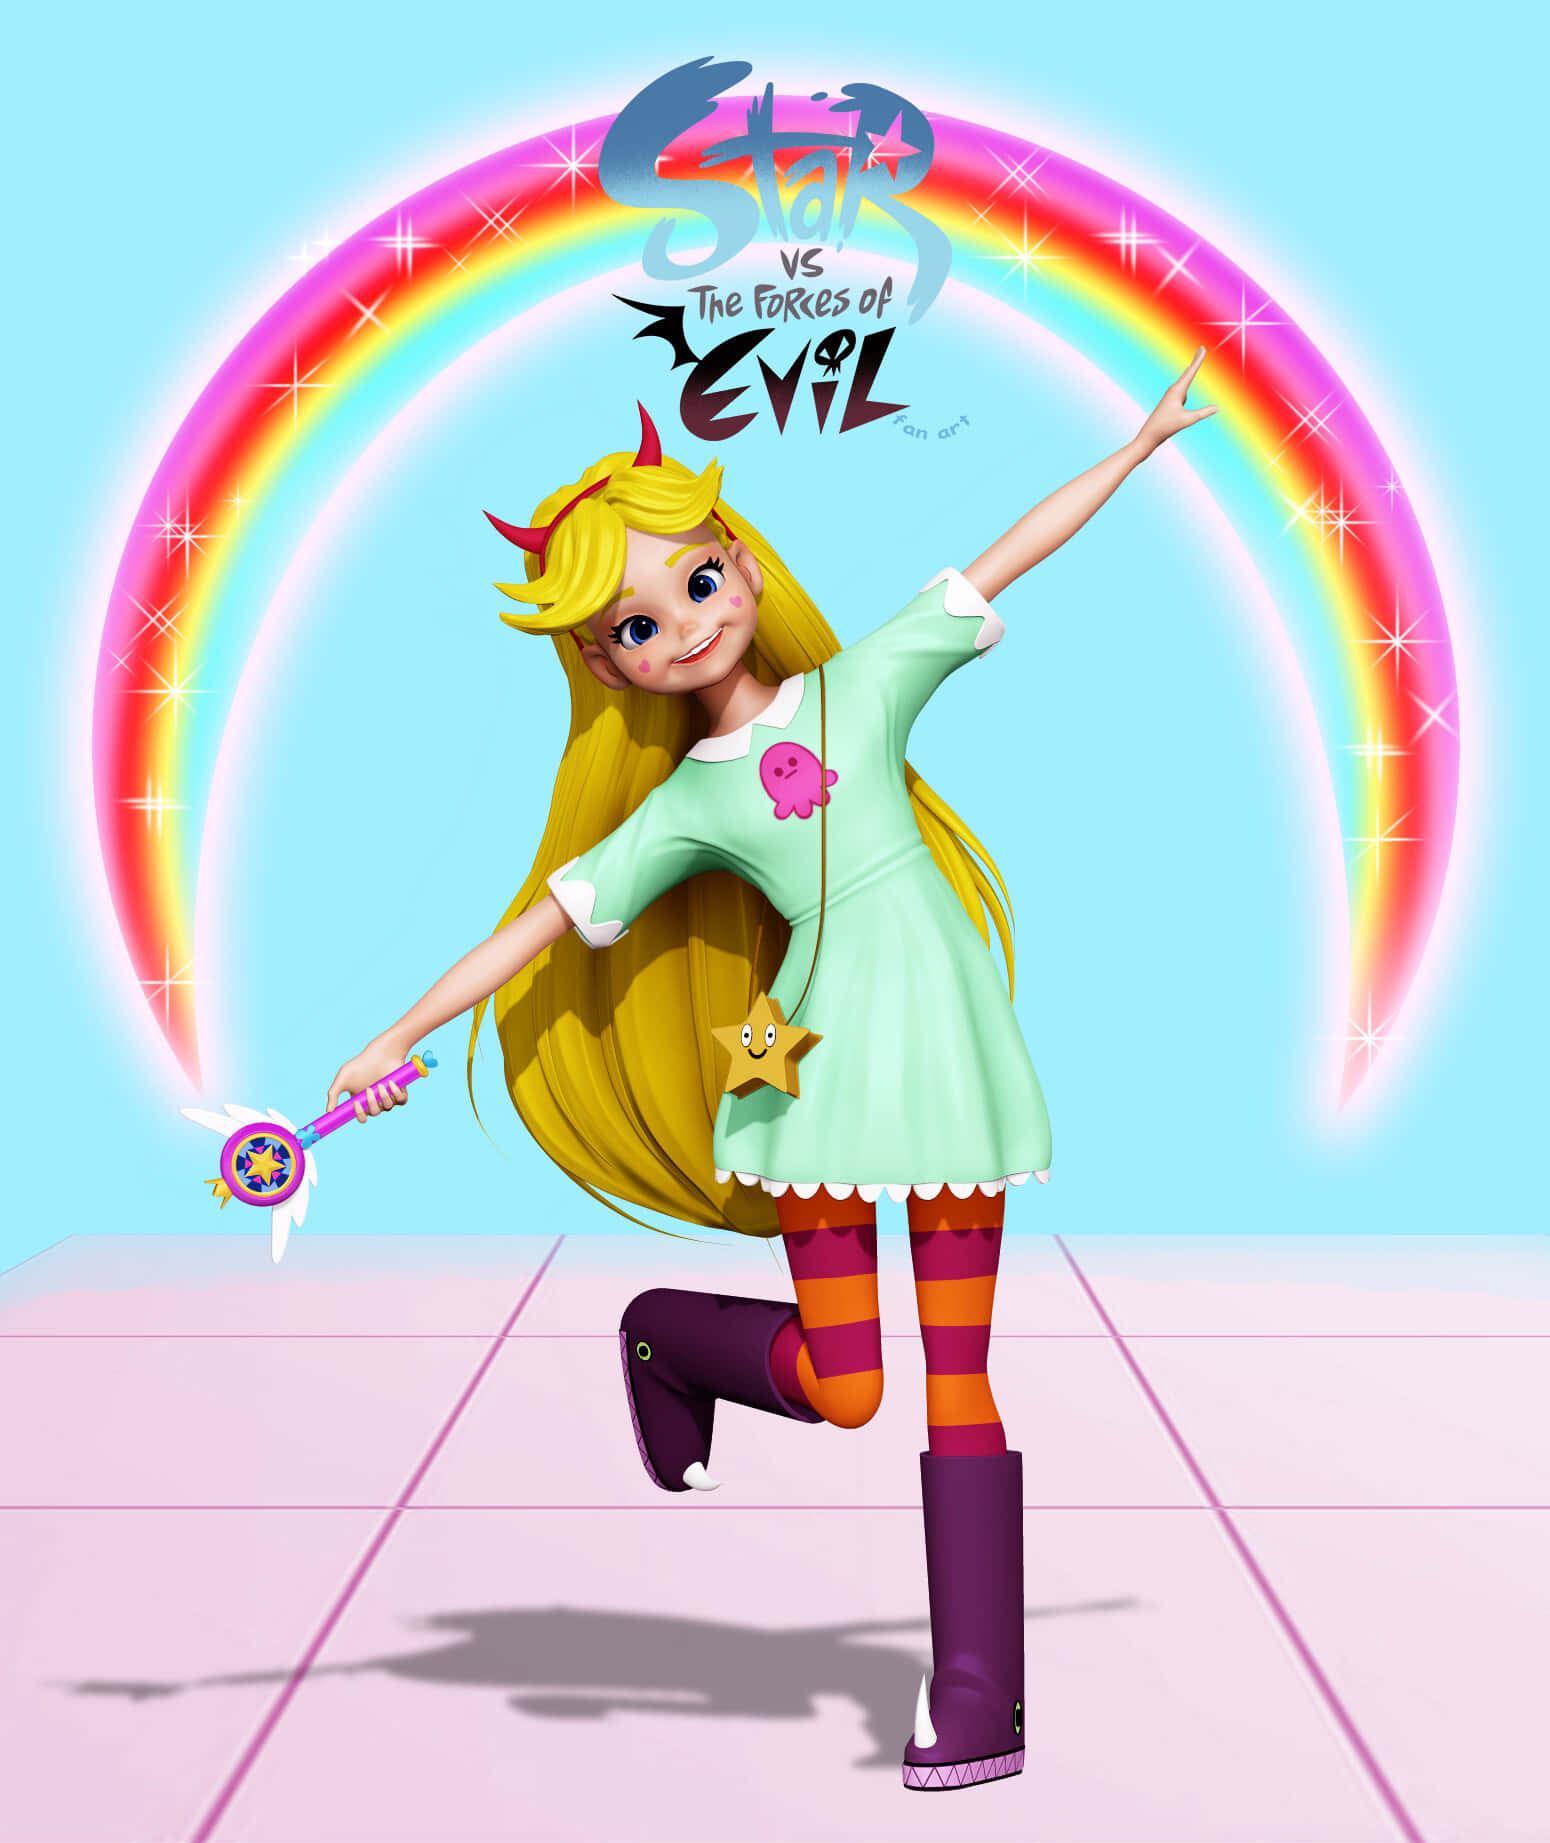 Starbutterfly De 'star Vs The Forces Of Evil'